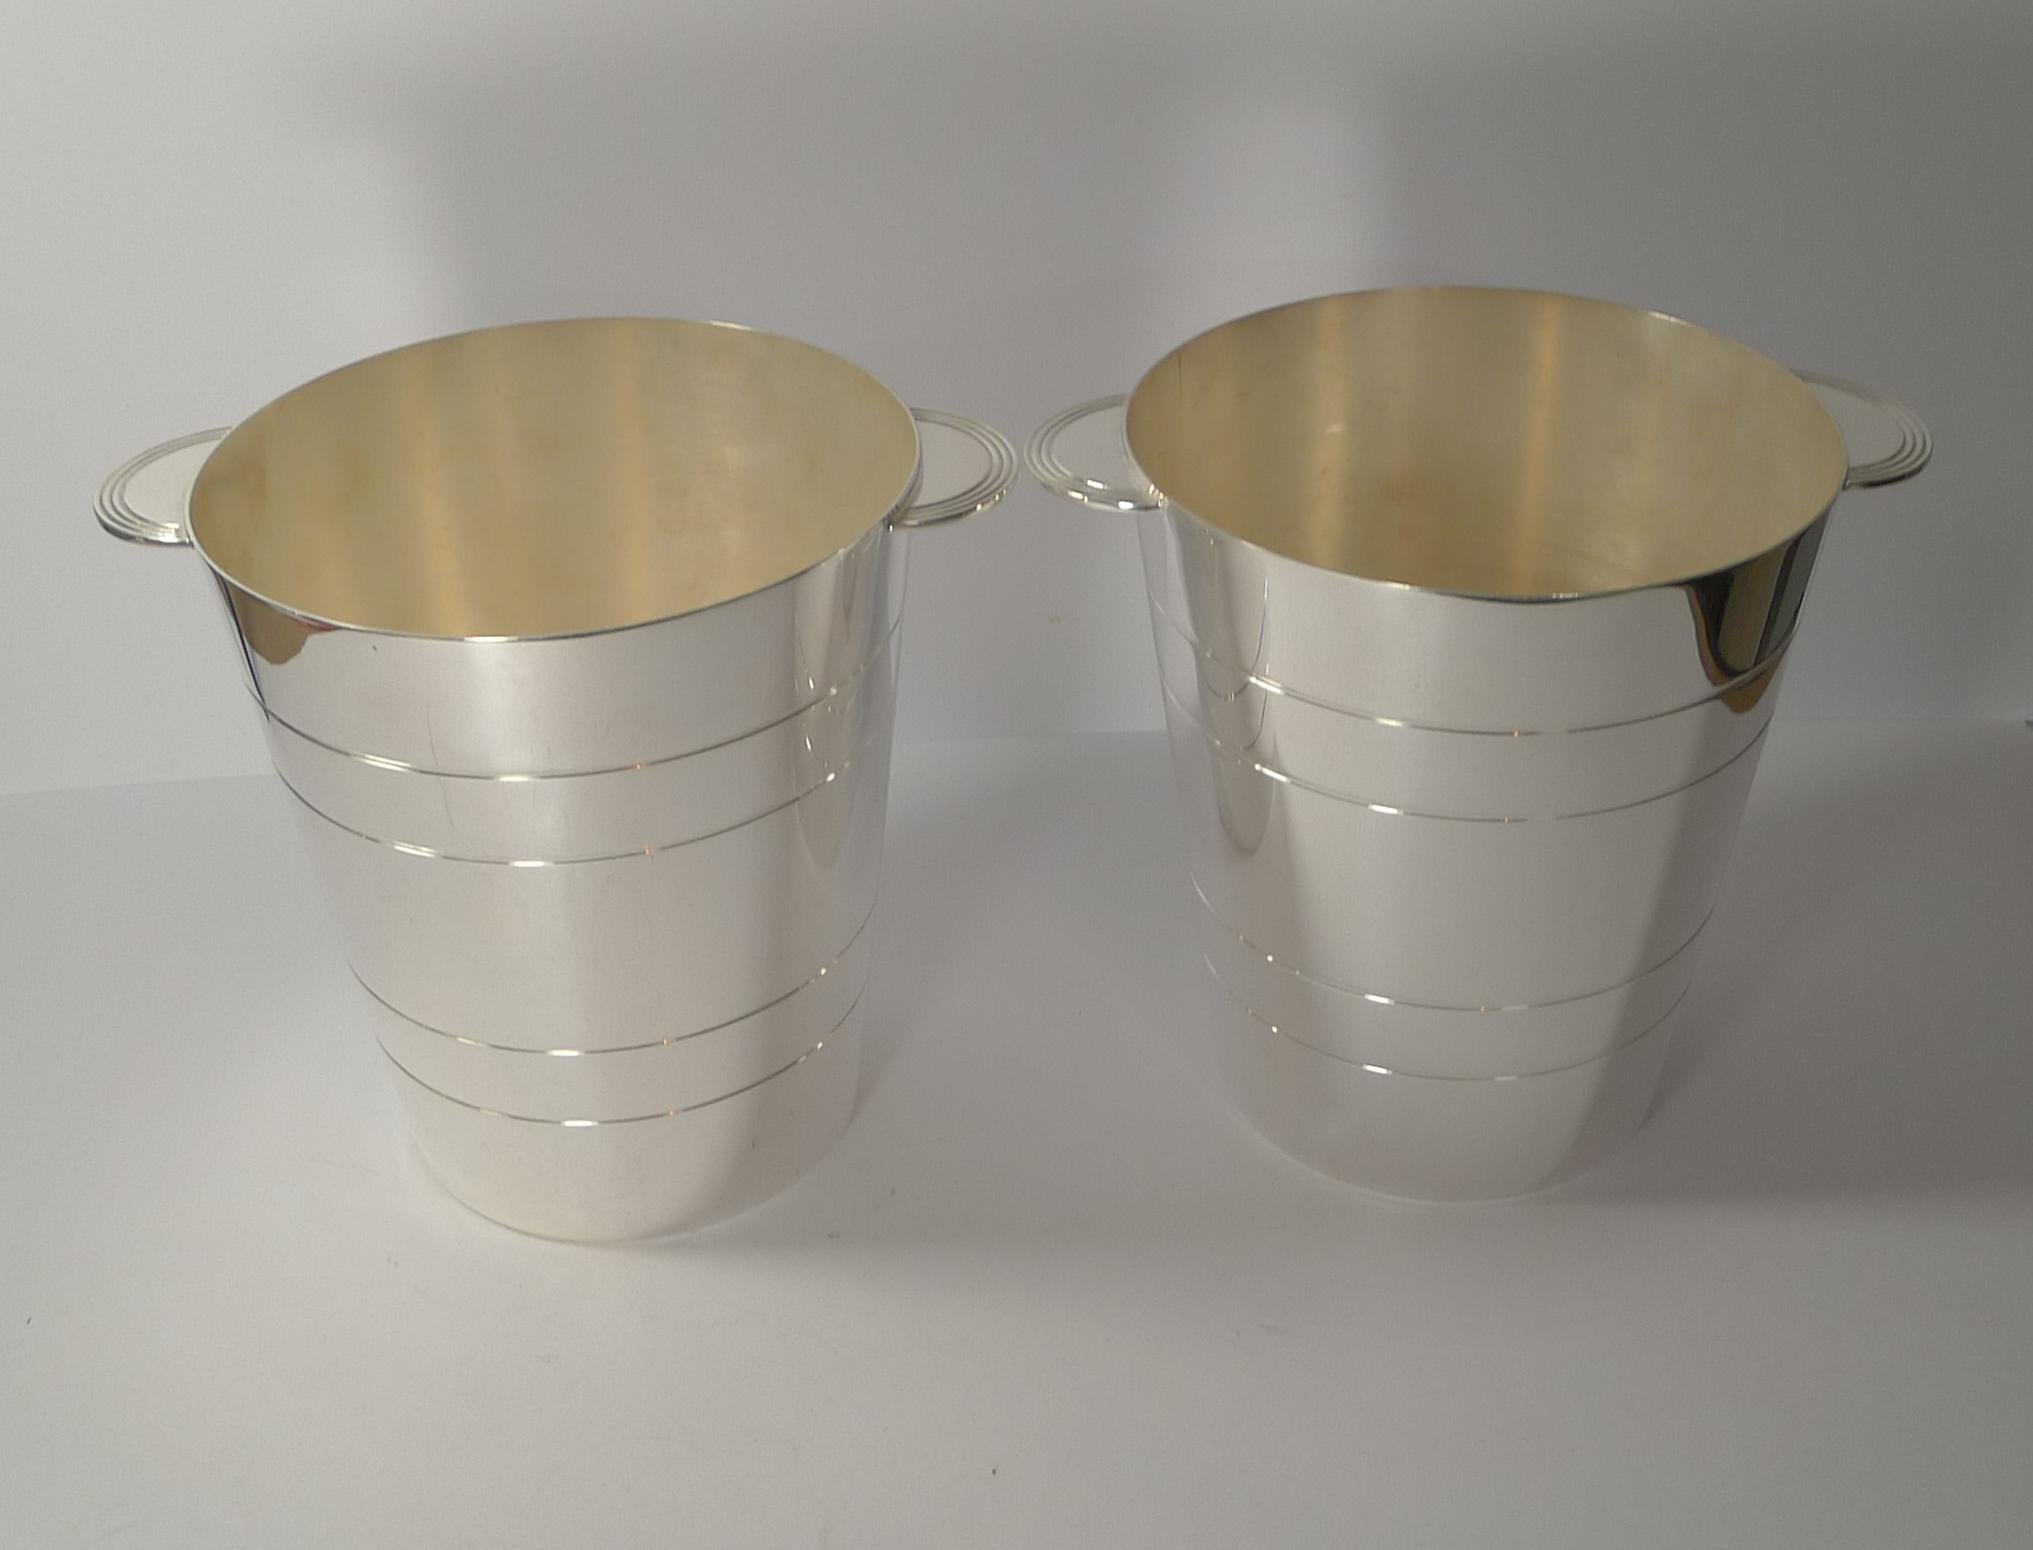 A truly fine pair of vintage English silver plated wine coolers or buckets Art Deco in style and as fashionable today as they were sixty years ago, a true classic style.

Just back from our silversmith, professionally polished to shine with all